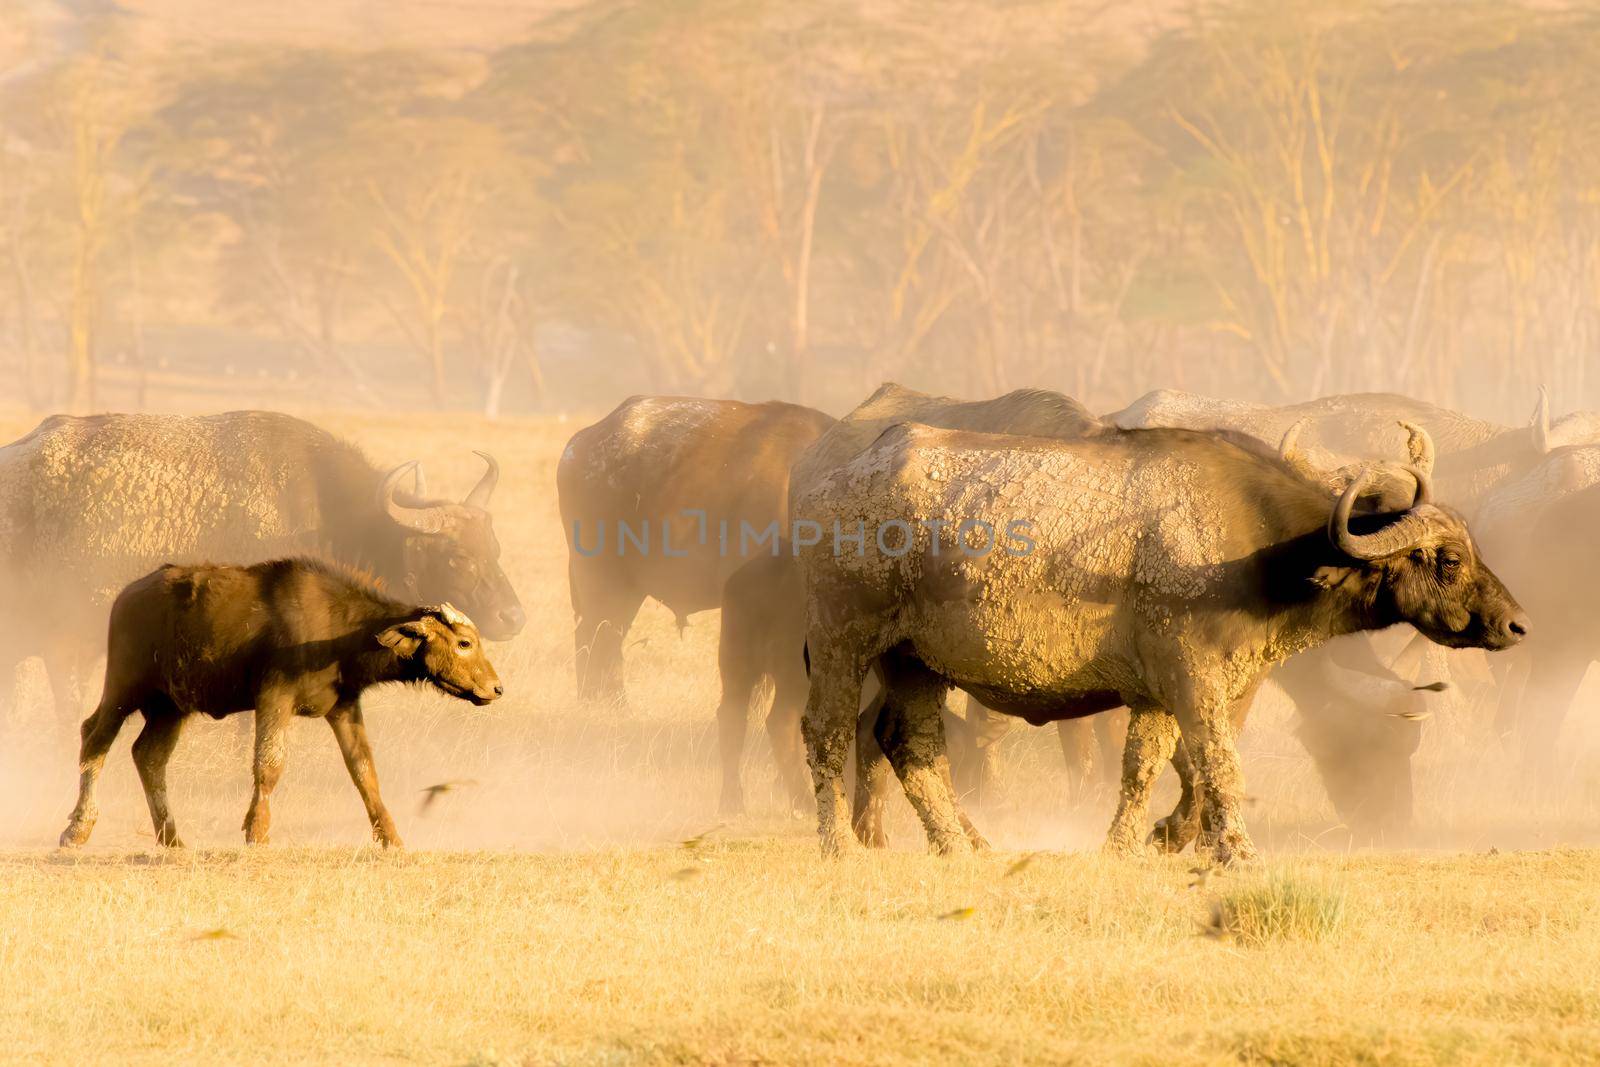 Cape buffaloes grazing for lunch in kenya Africa